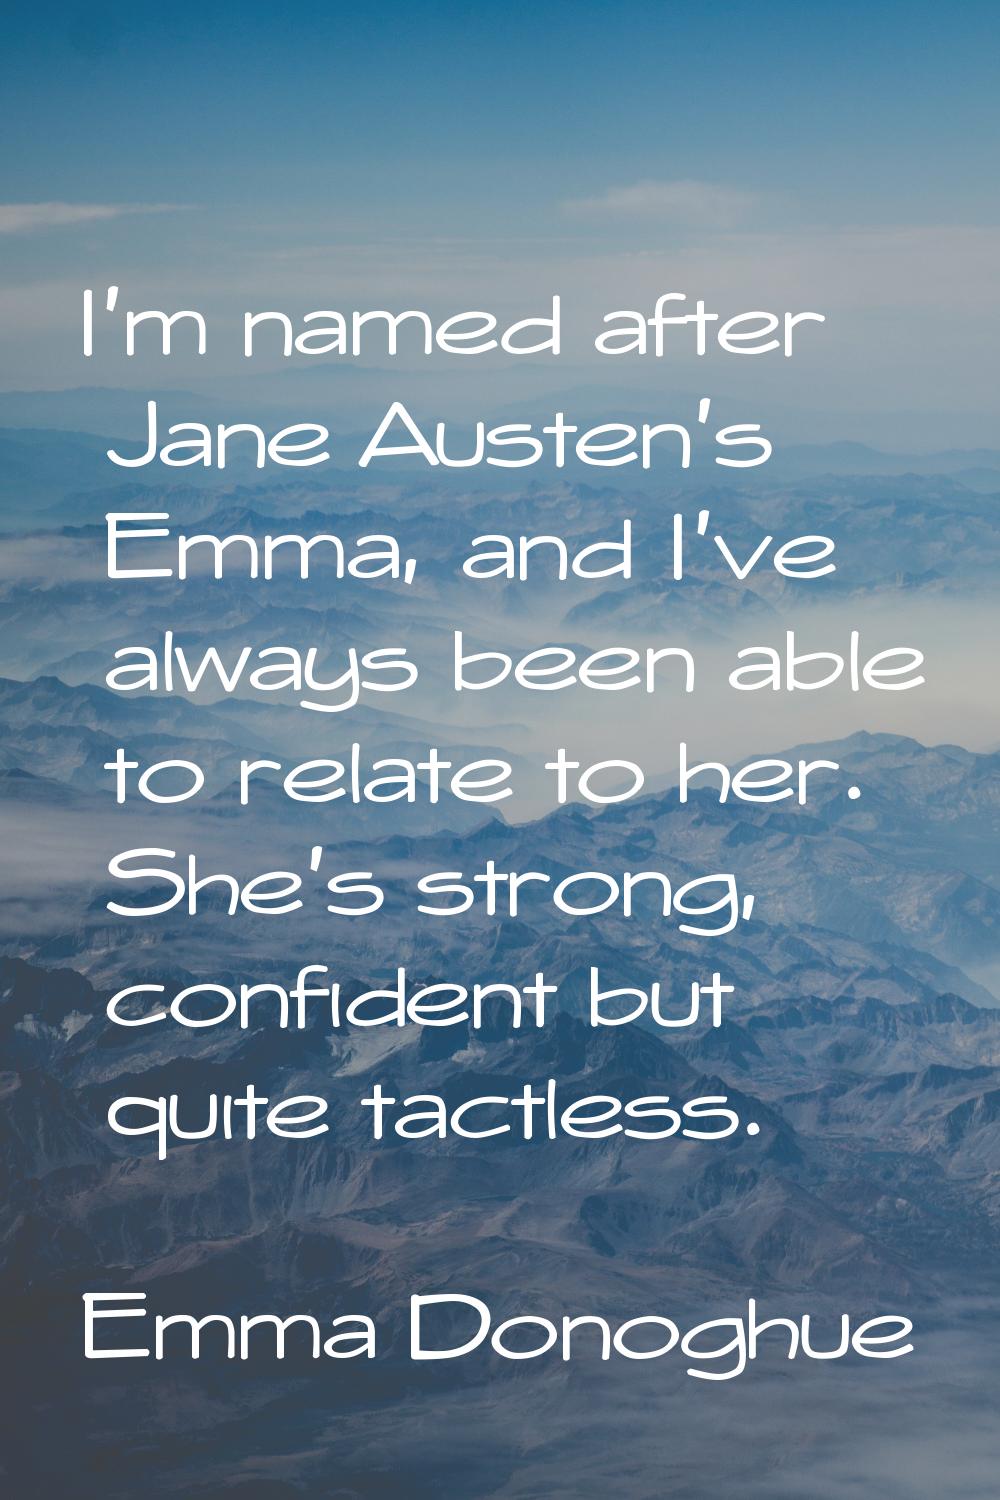 I'm named after Jane Austen's Emma, and I've always been able to relate to her. She's strong, confi